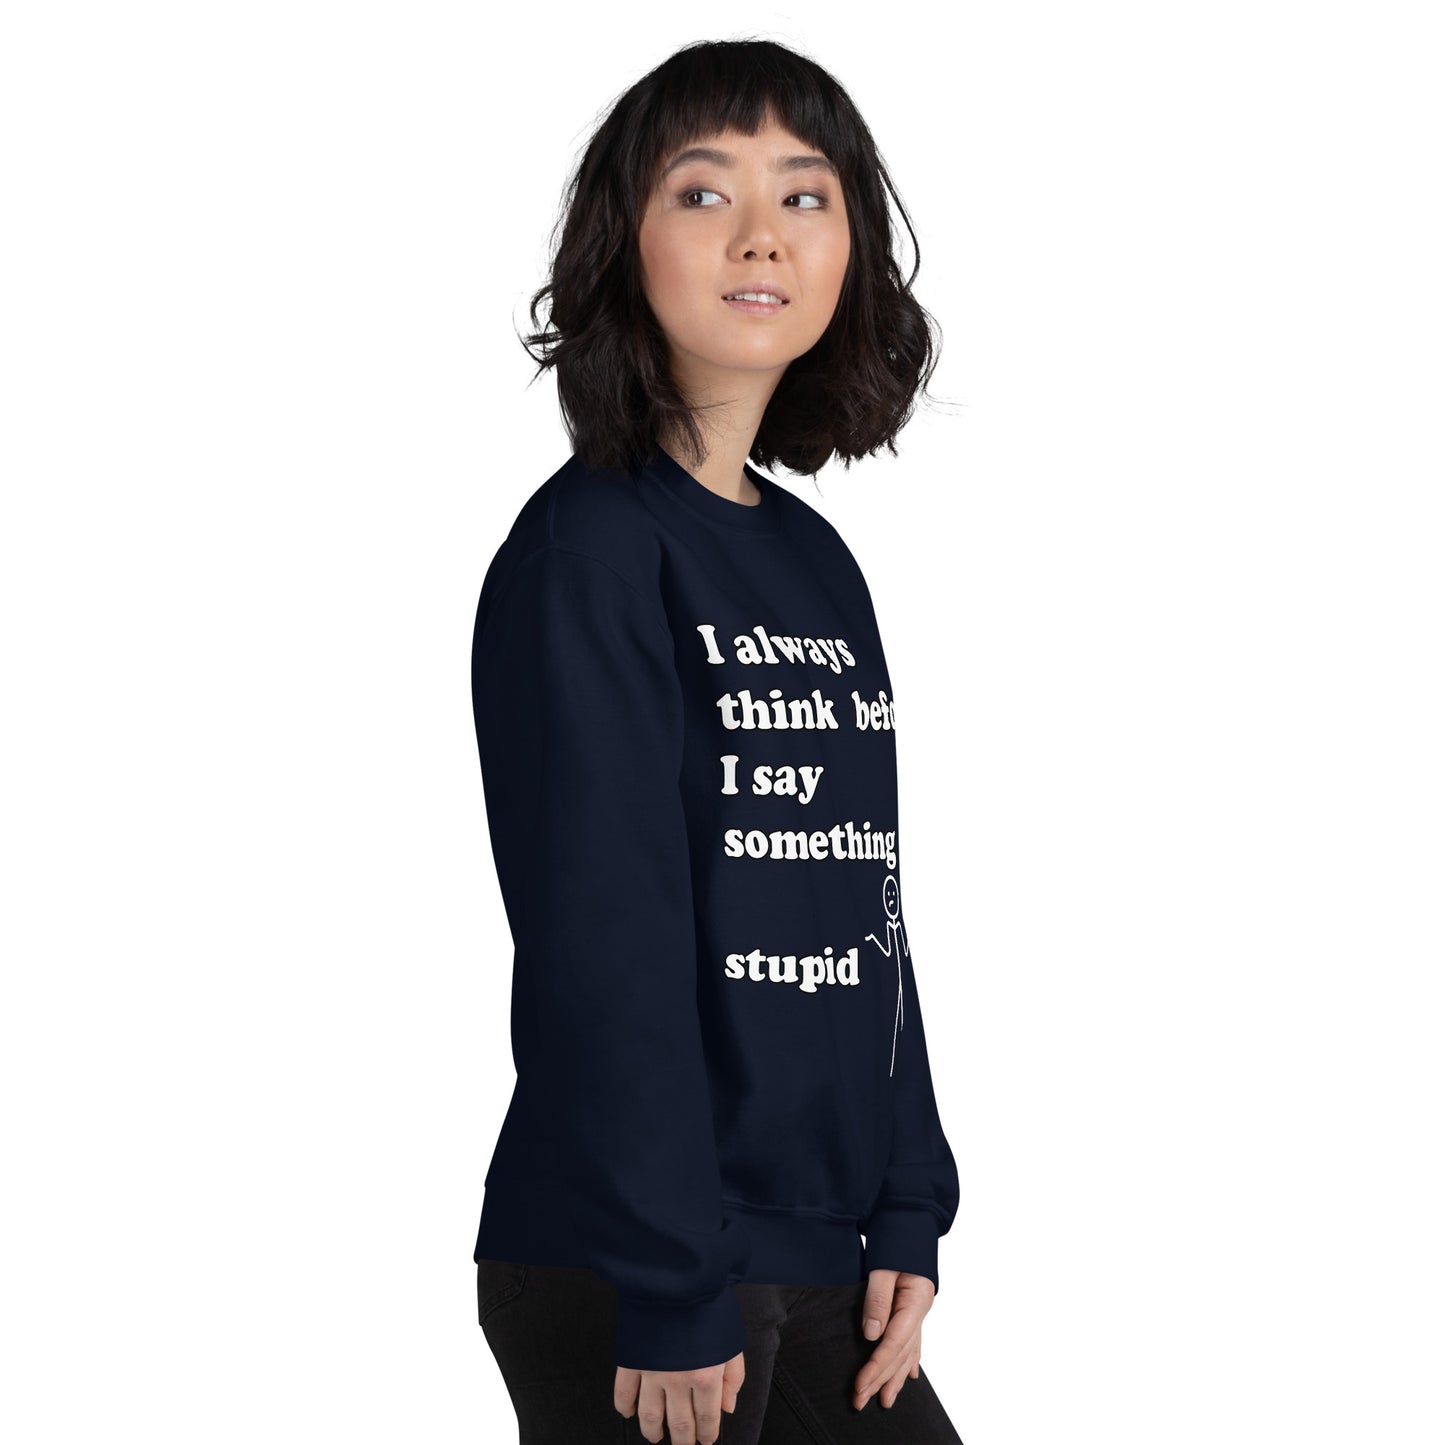 Woman with navy blue sweatshirt with text "I always think before I say something stupid"